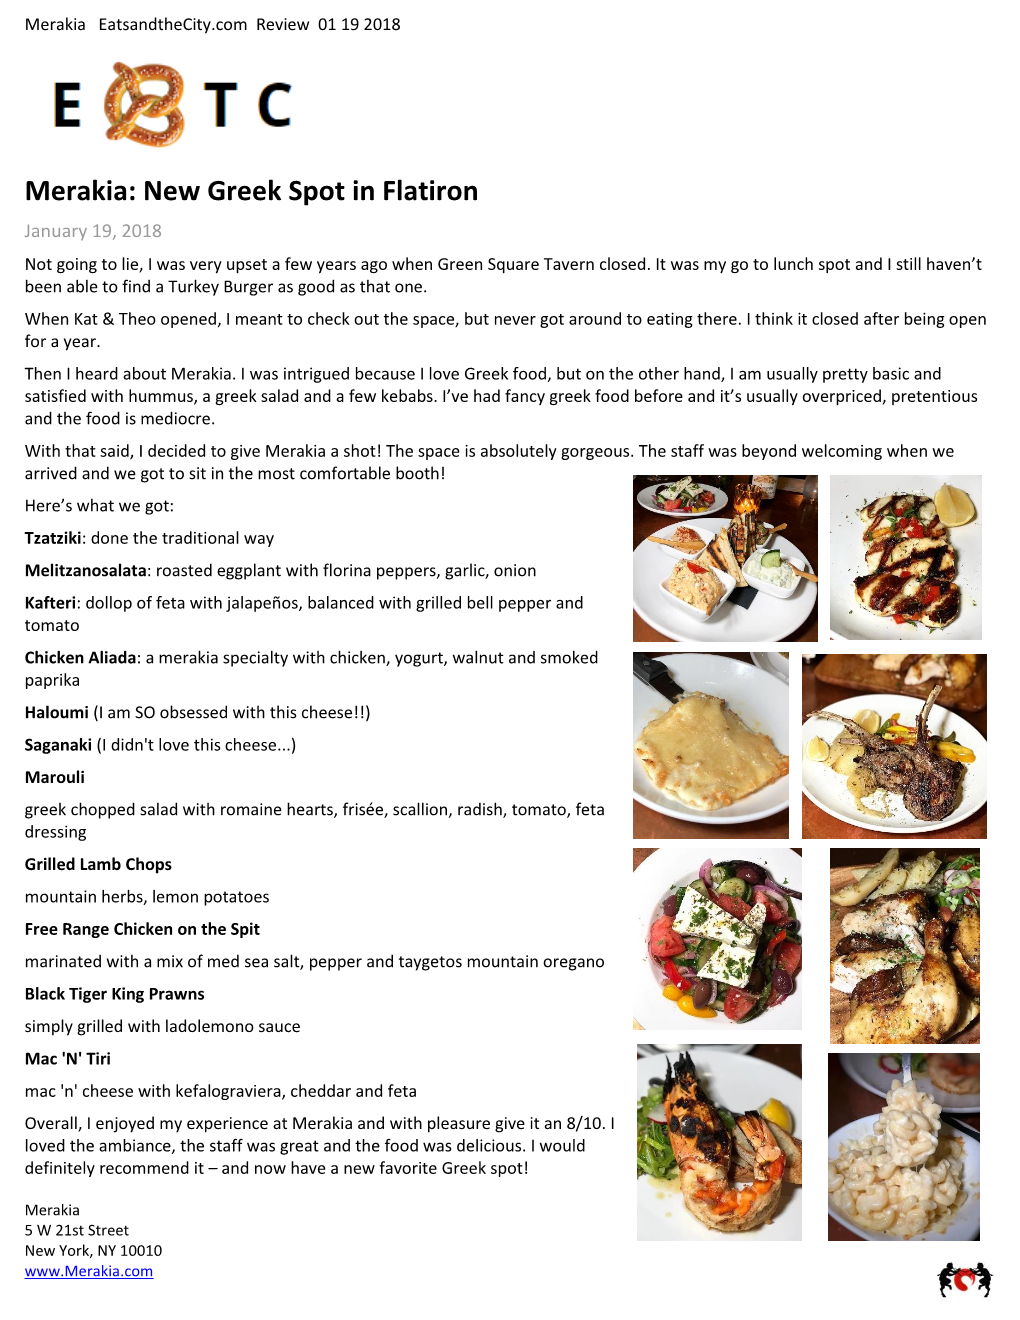 Merakia: New Greek Spot in Flatiron January 19, 2018 Not Going to Lie, I Was Very Upset a Few Years Ago When Green Square Tavern Closed